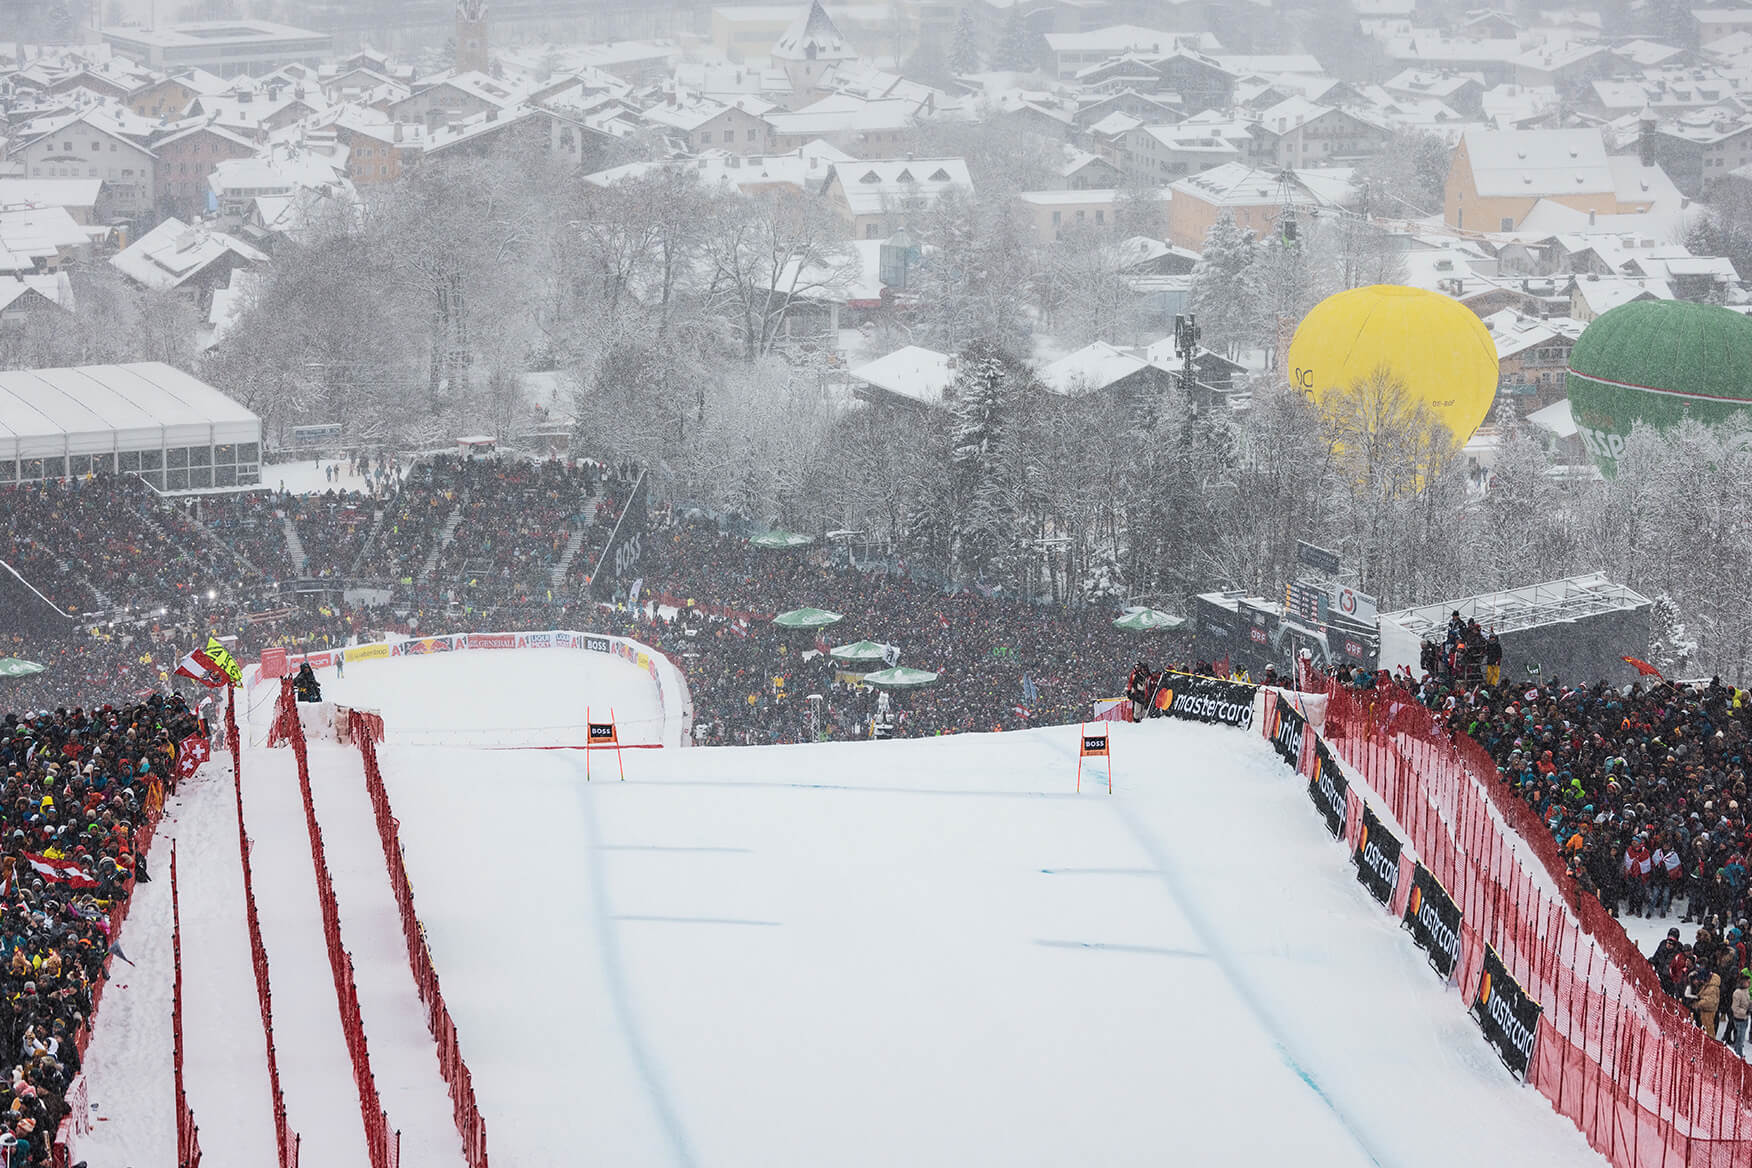 The finish area of The Streif at Kitzbühel